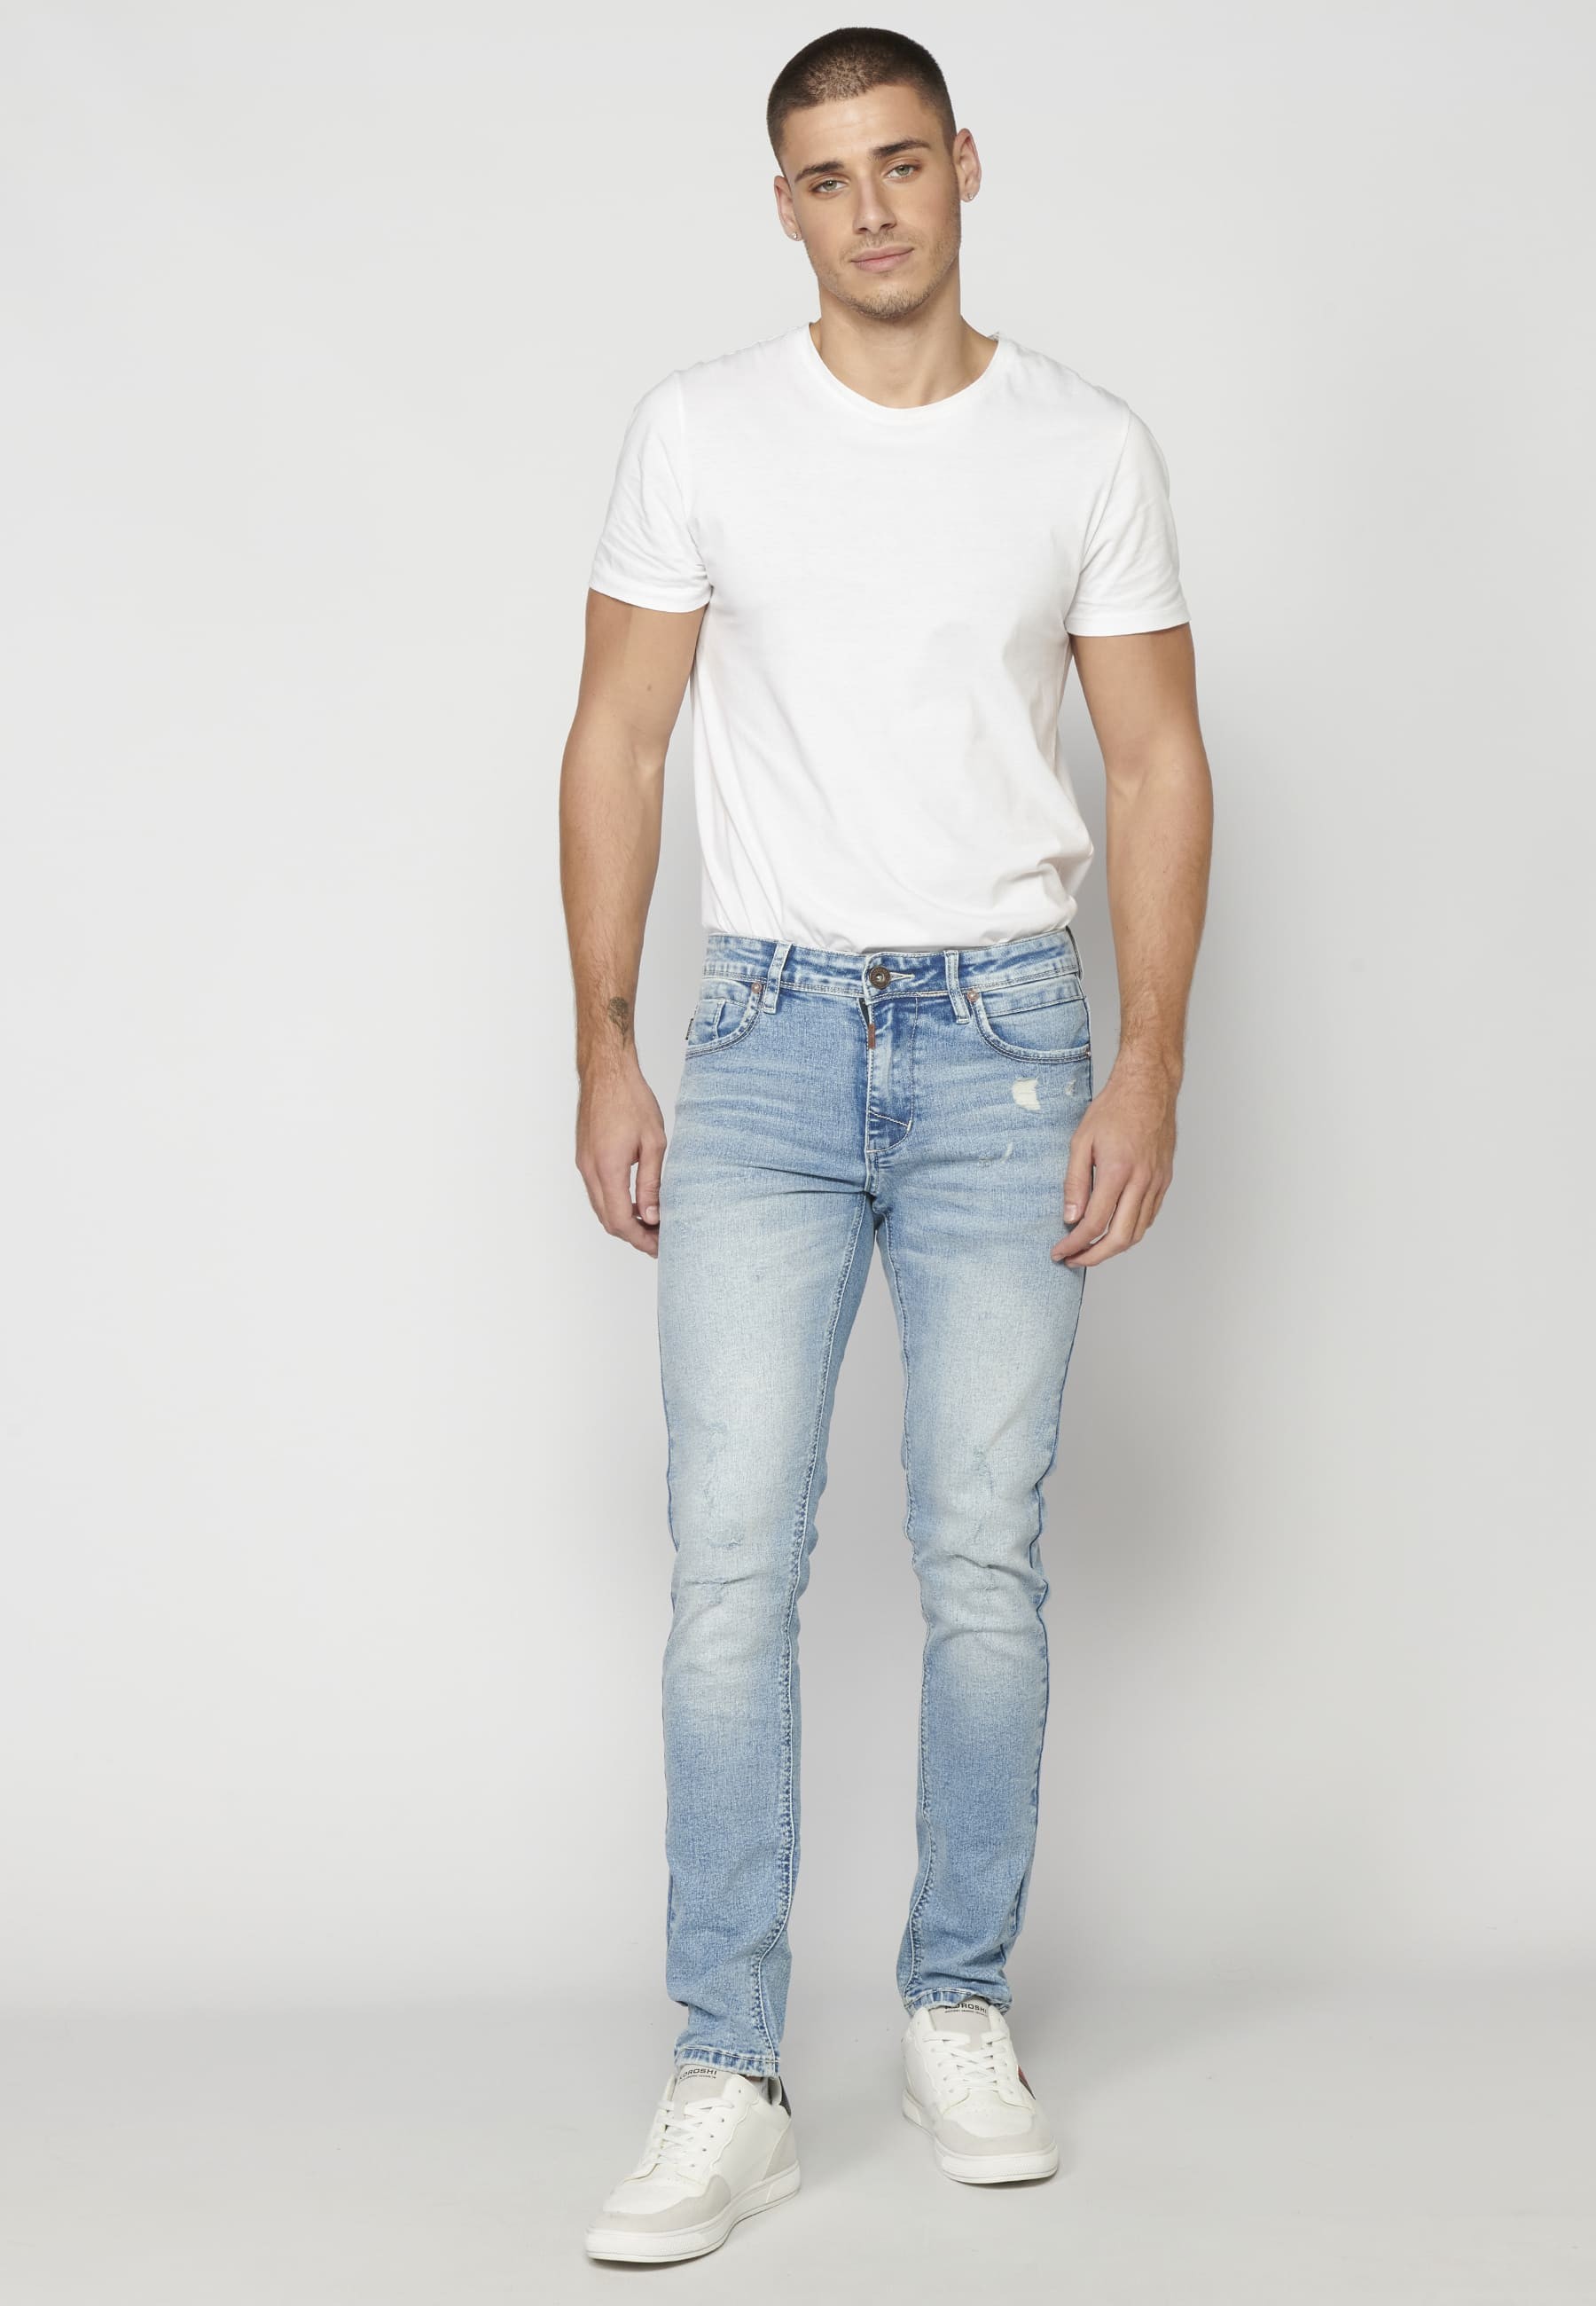 Slim fit jean trousers with five pockets for Men